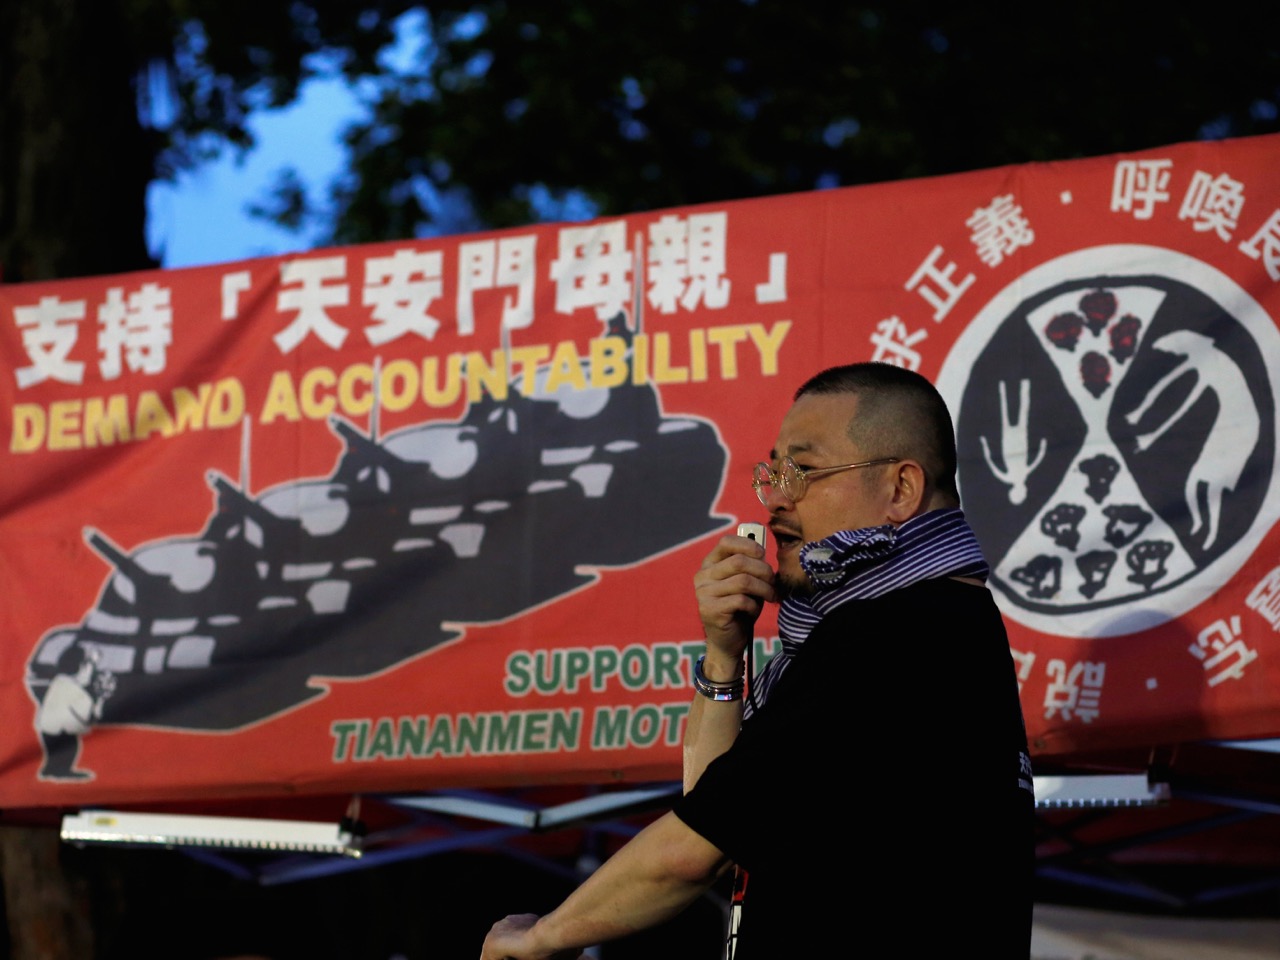 On 4 June 2016, an activist in Hong Kong urges people to join a candlelight vigil to mark the 27th anniversary of the crackdown on a pro-democracy movement at Beijing's Tiananmen Square in 1989